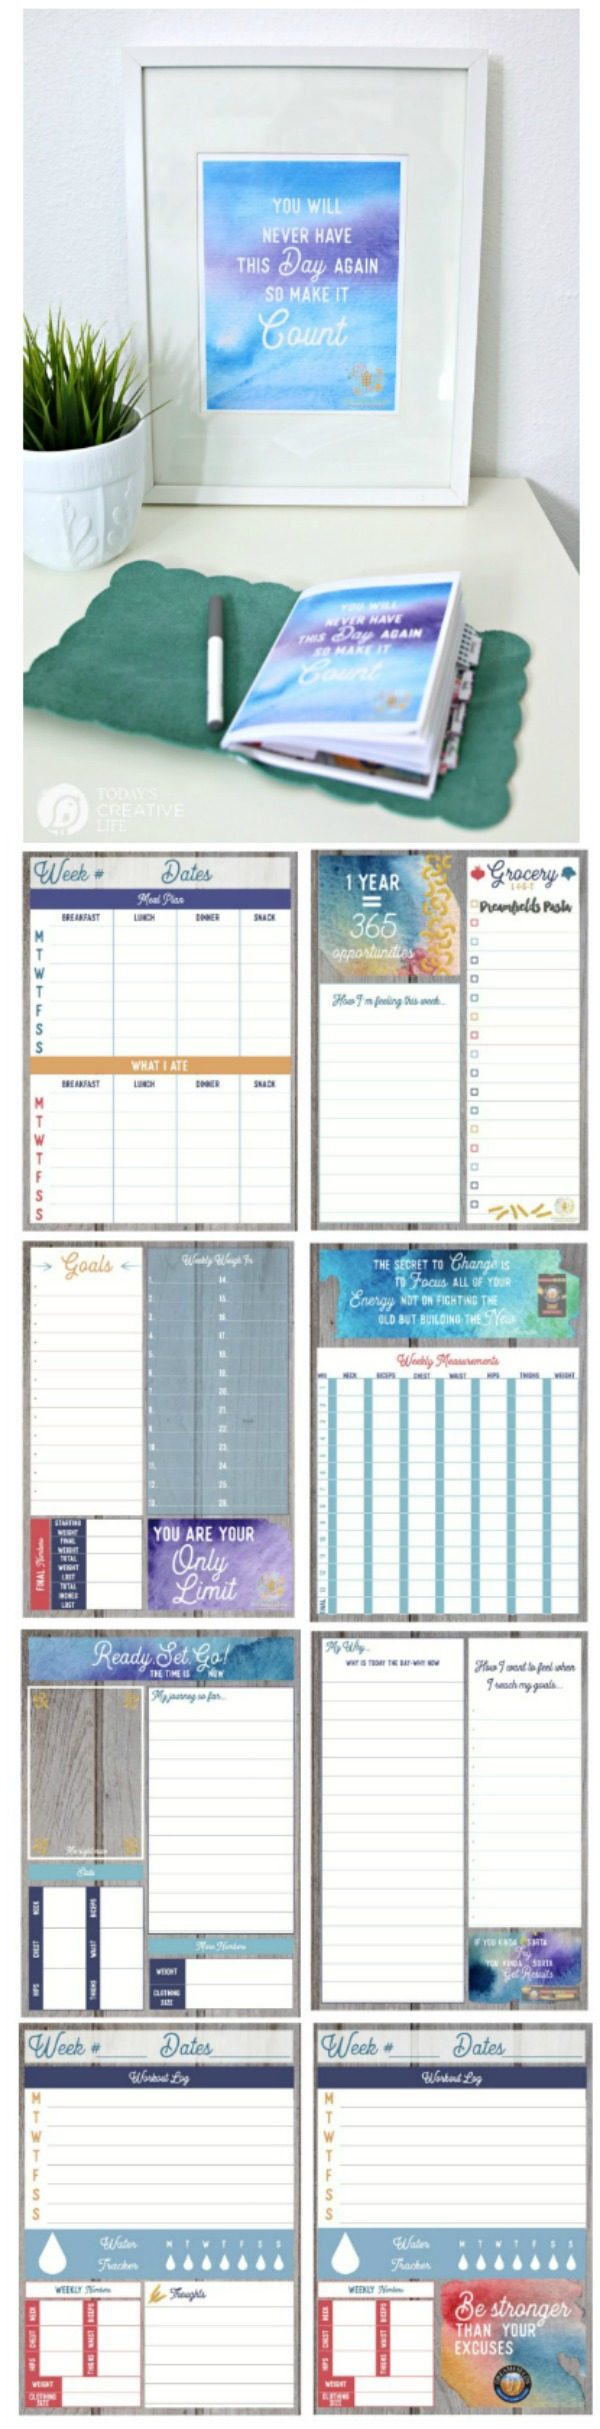 Free Printable Fitness and Wellness Planner | Exercise workout planner, Menu Planner, Grocery List, Accountability, Inspirational | Download your free copy at TodaysCreativeLife.com AD #healthyhacks